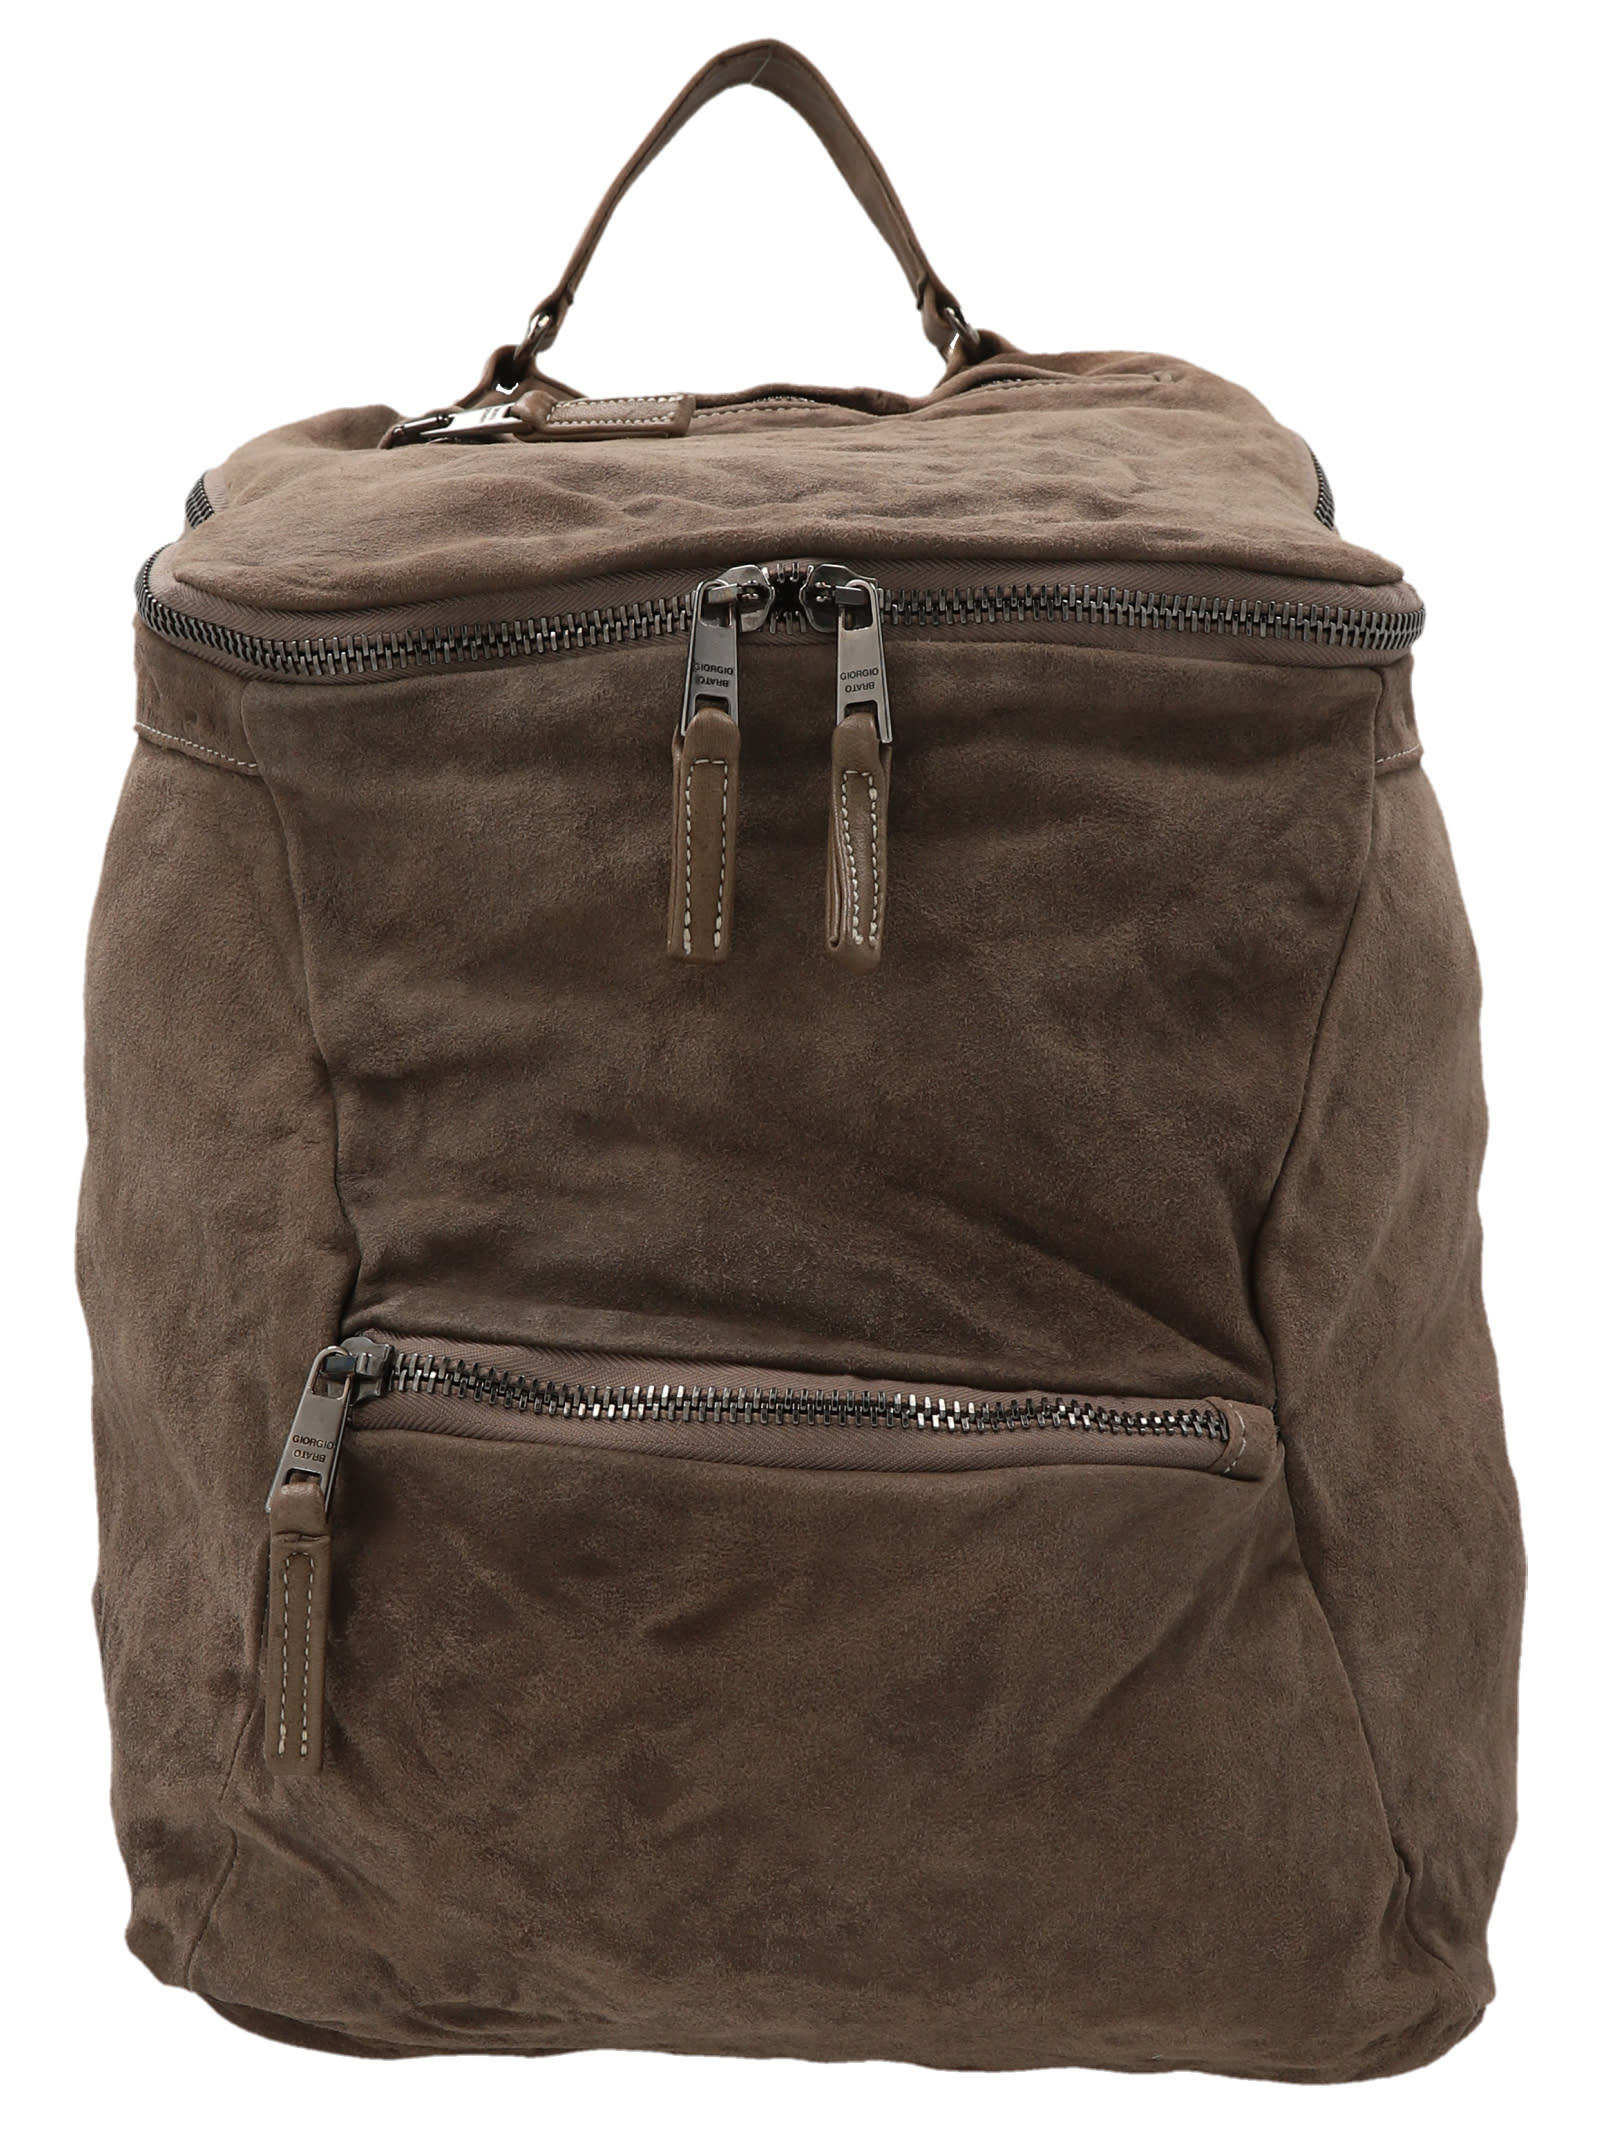 Giorgio Brato Leather Suede Backpack In Brown